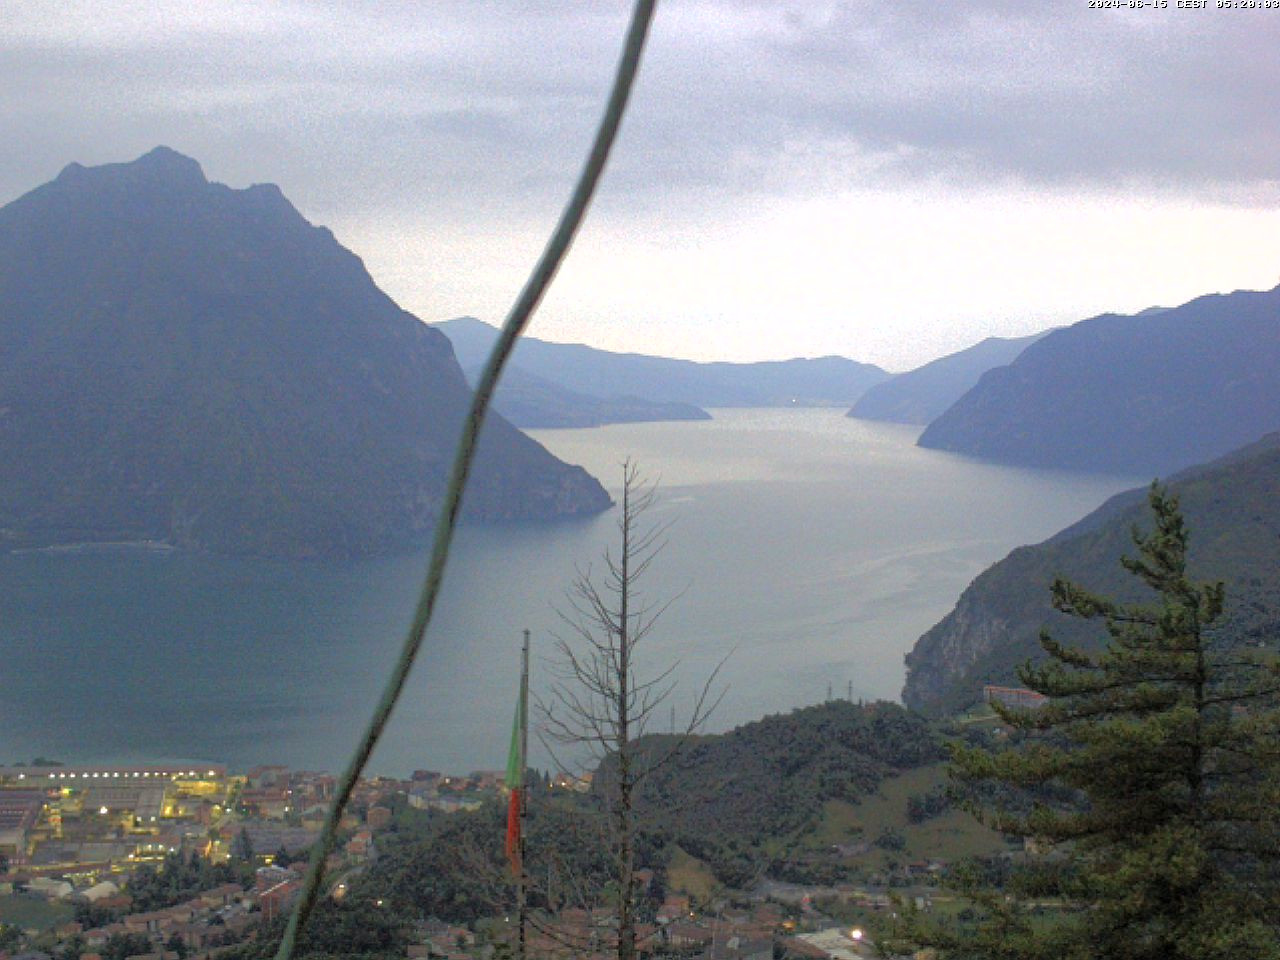 Lovere (Lac d'Iseo) Me. 05:29